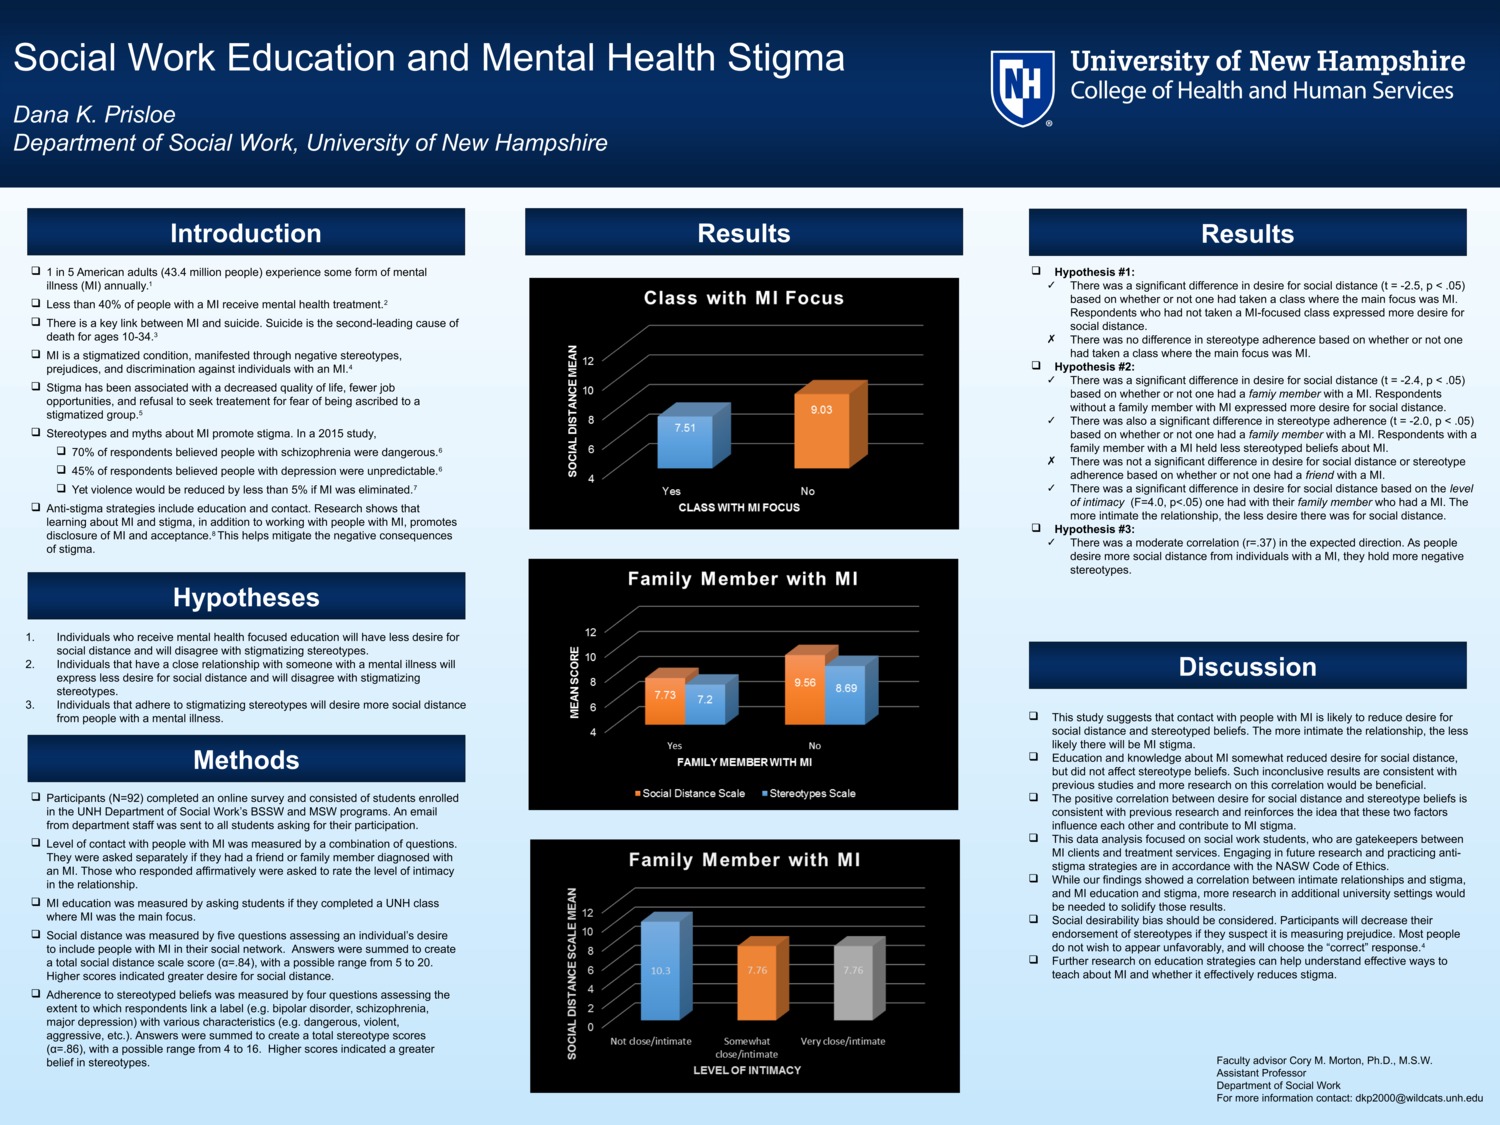 Social Work Education And Mental Health Stigma by dkp2000